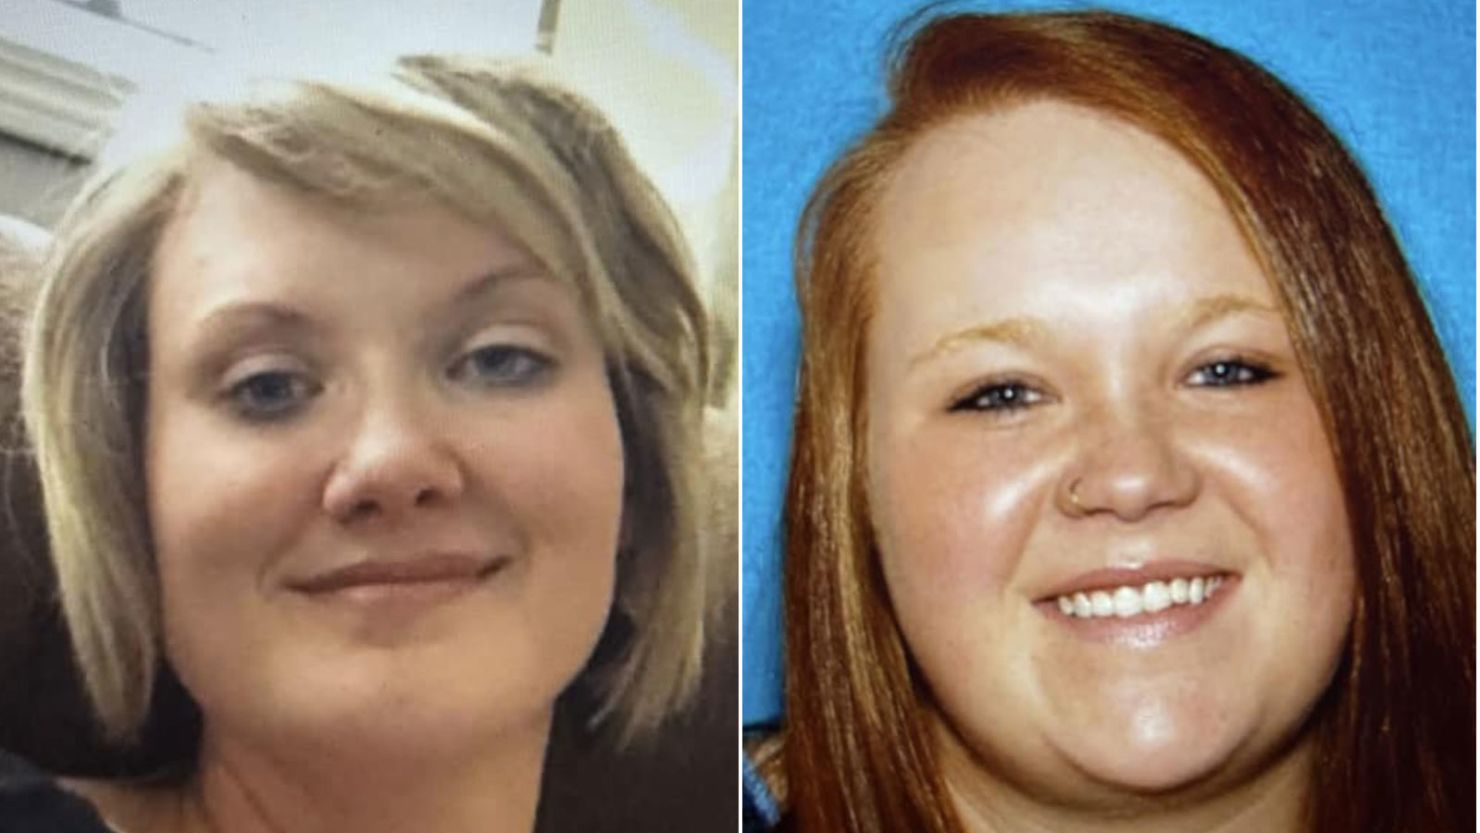 Jilian Kelley and Veronica Butler went missing while driving together to pick up children, state officials said.